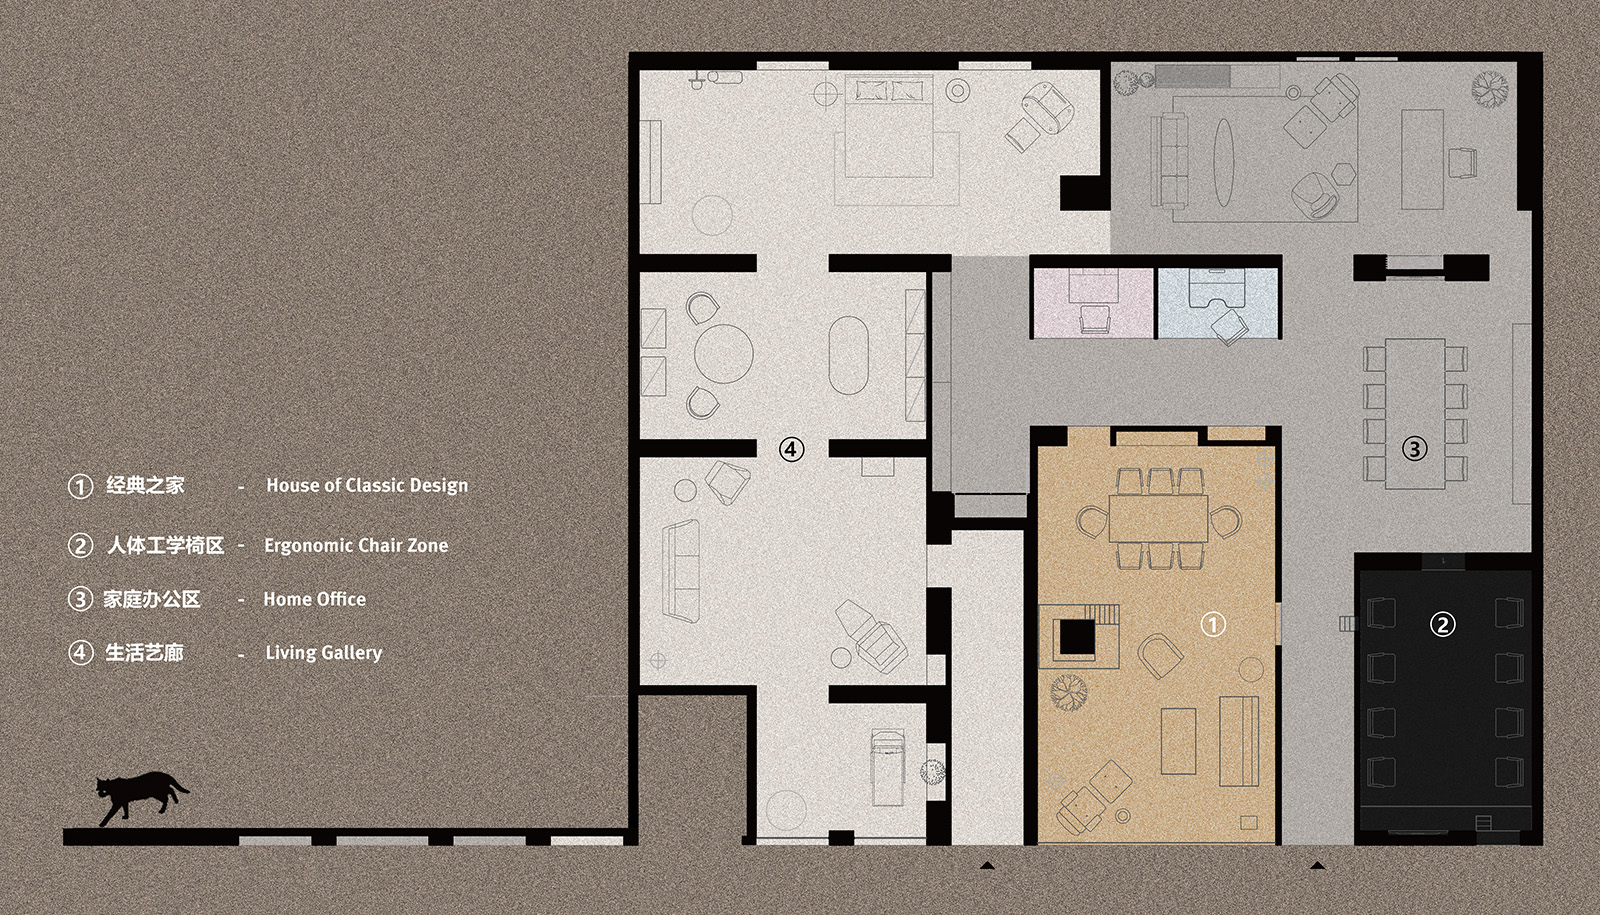 Yi’s House + HermanMiller / Overview